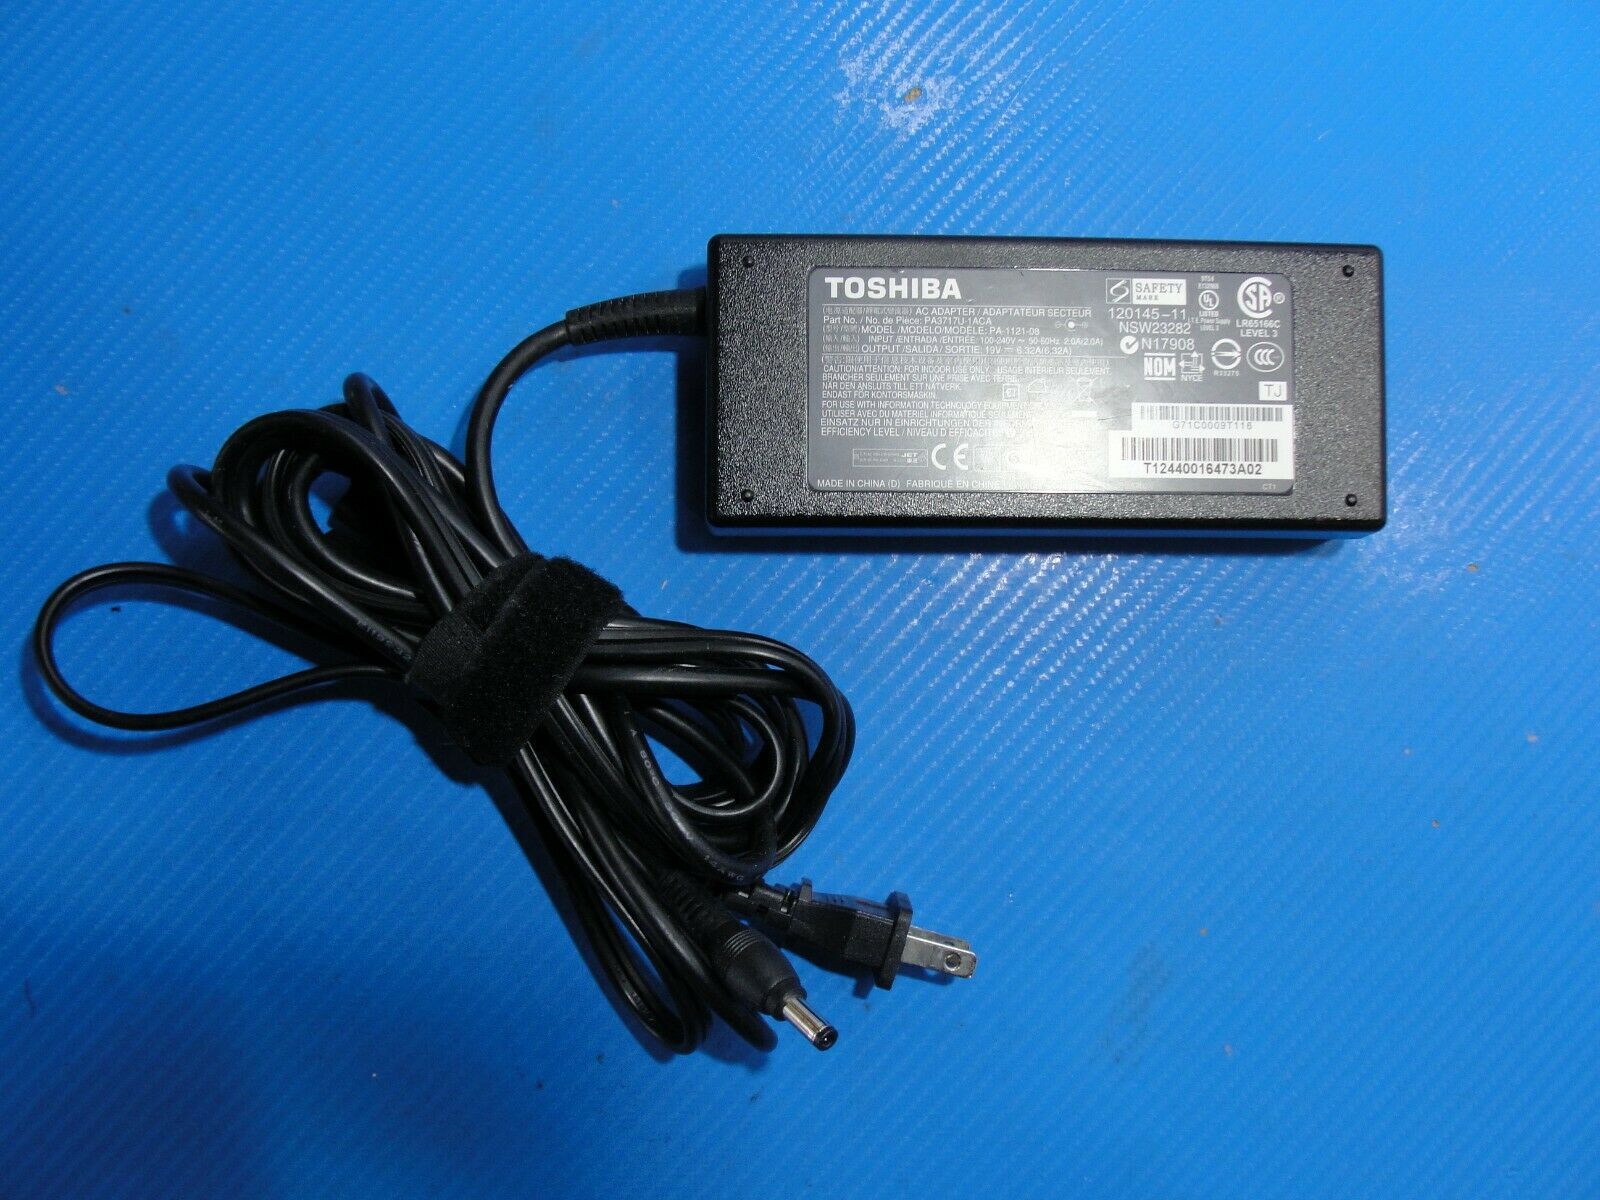 Genuine Toshiba Laptop Charger AC Adapter Power Supply PA3717U-1ACA PA-1121-08 - Laptop Parts - Buy Authentic Computer Parts - Top Seller Ebay